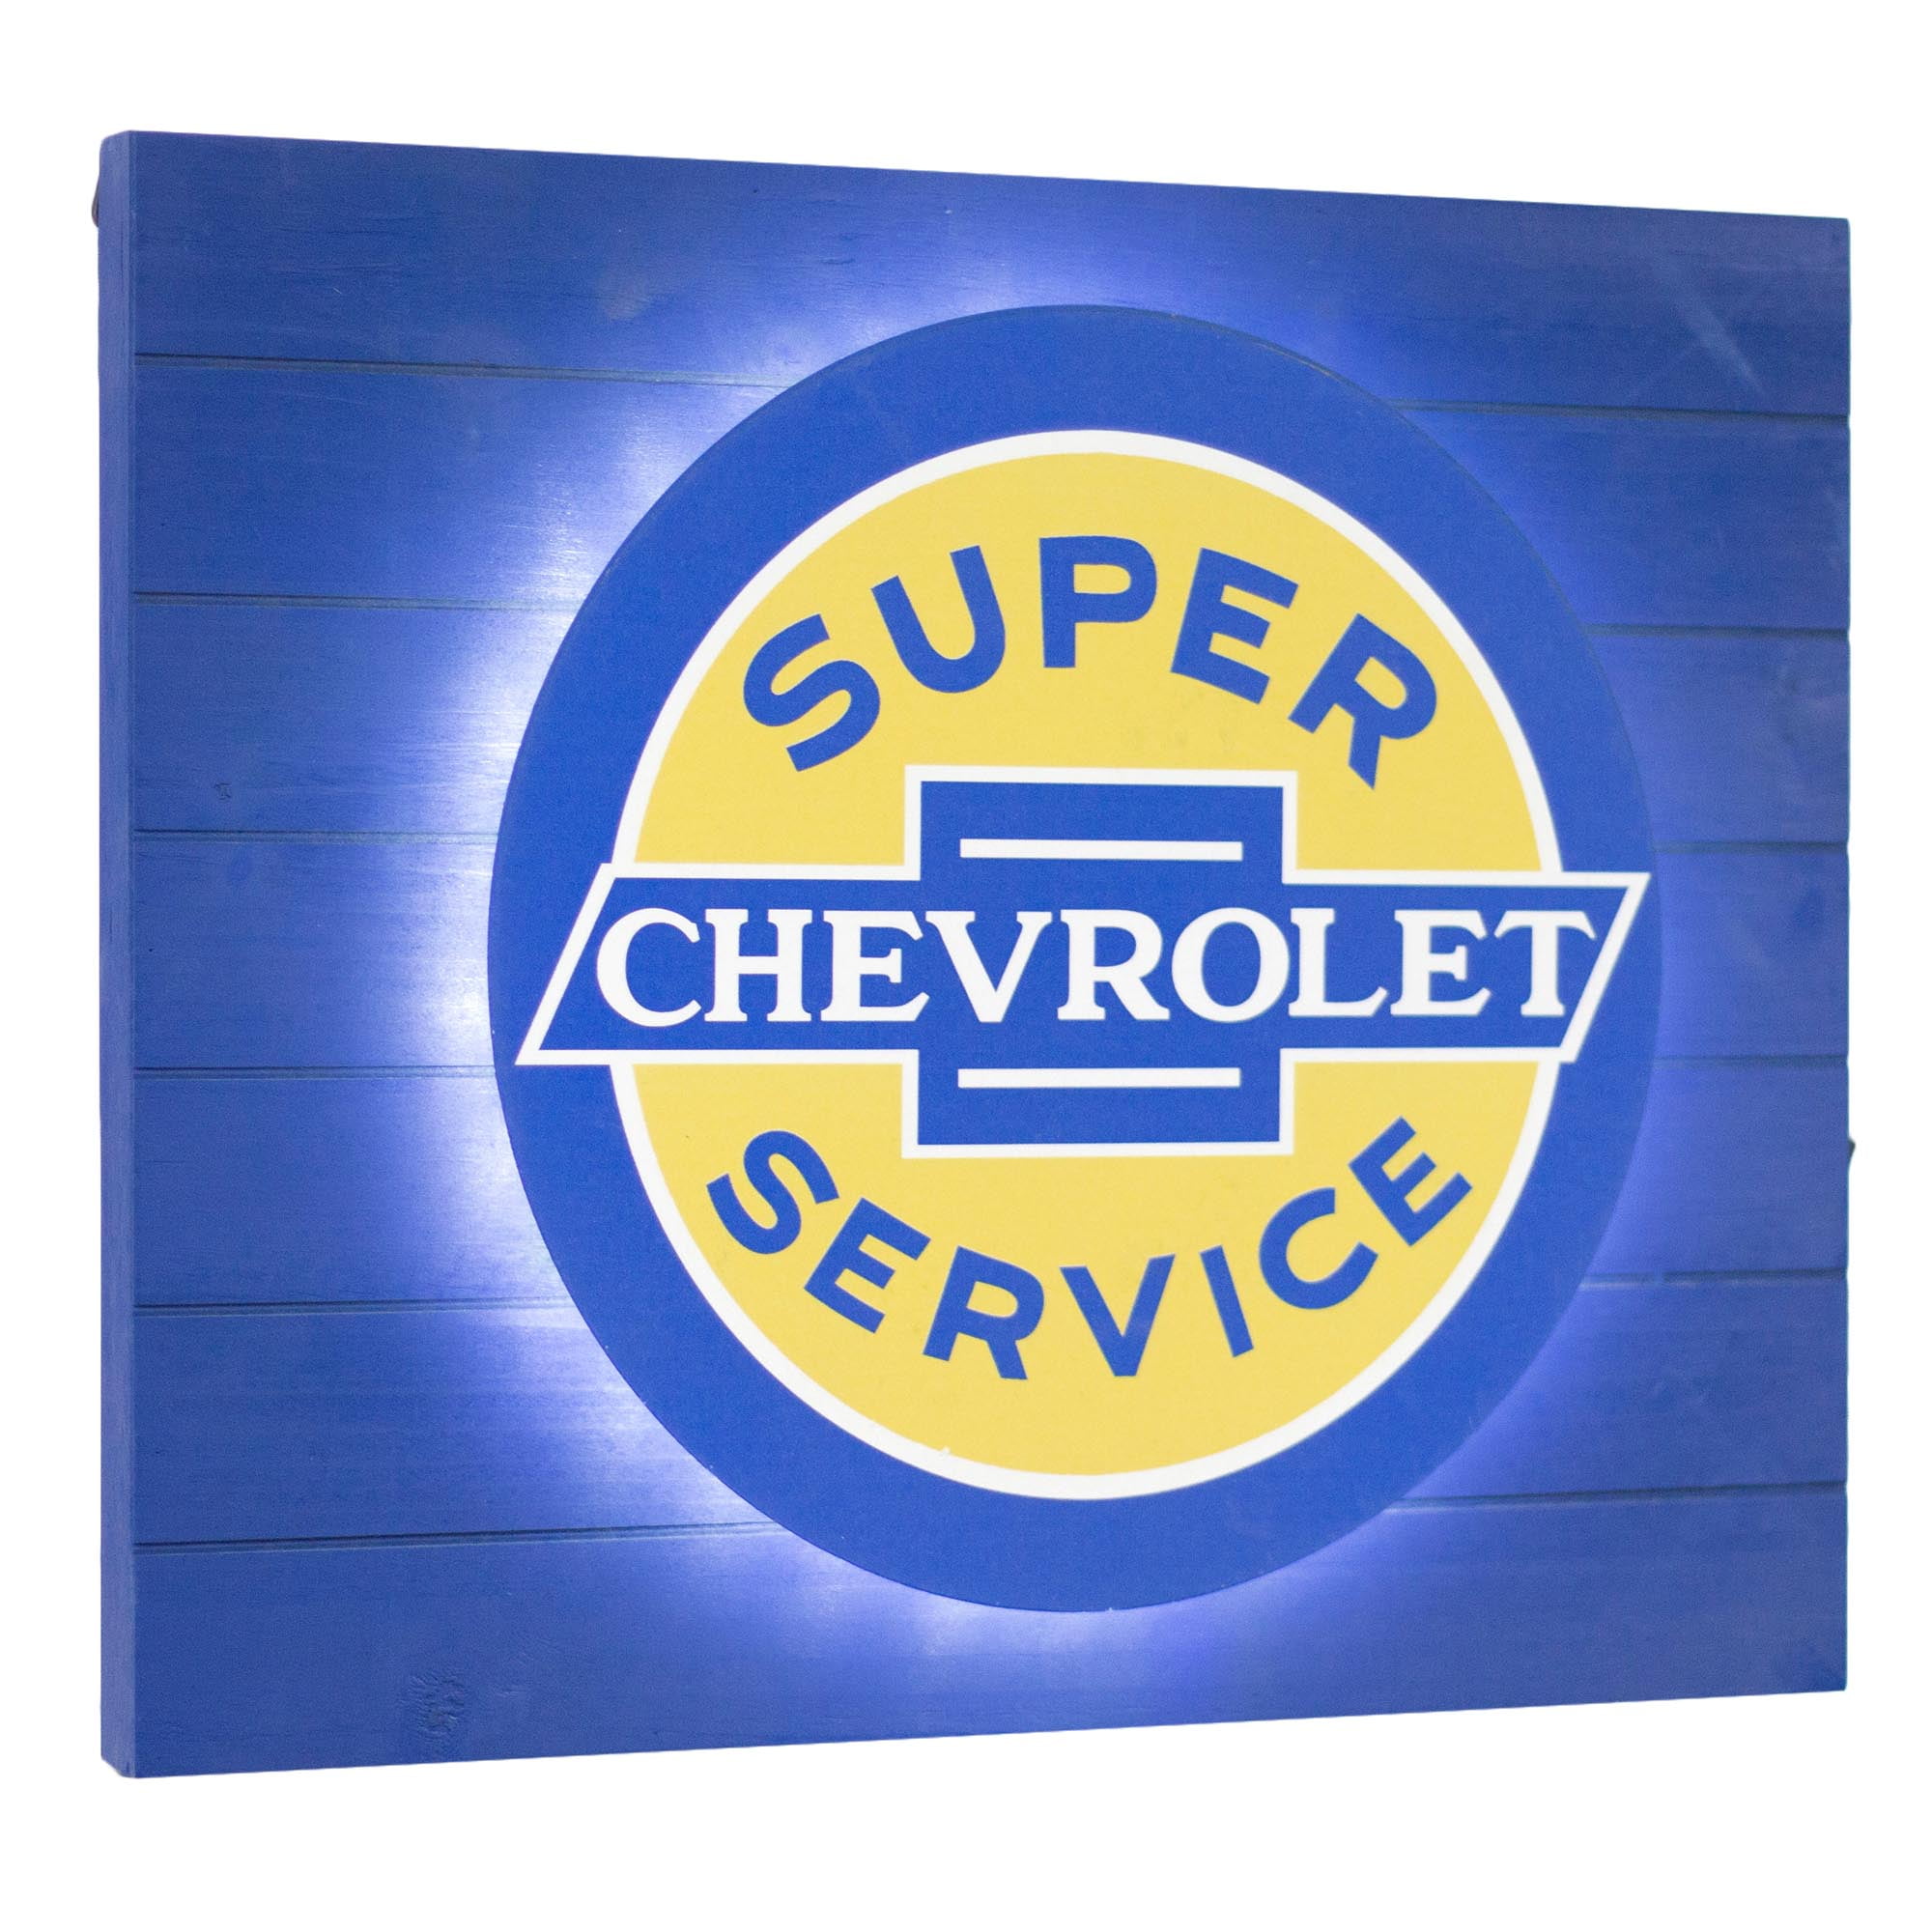 Chevrolet Radiator Shelf Sign Metal Wall Decor Vintage Style Gas Oil Can Display 